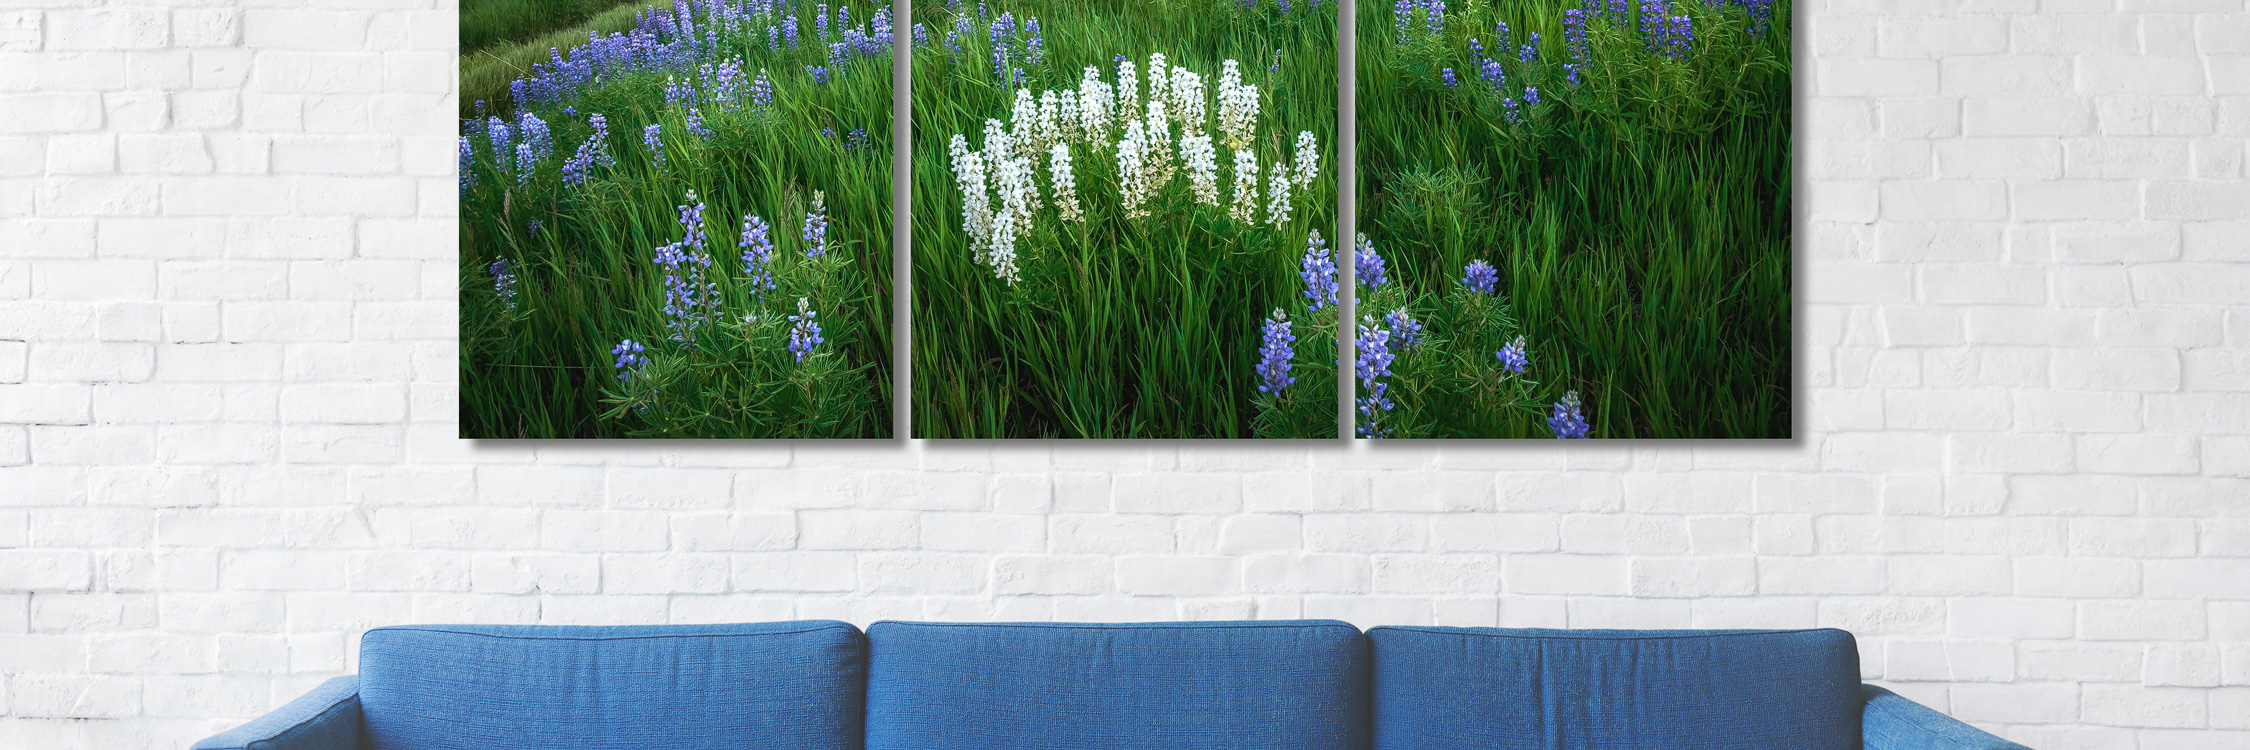 A beautiful panoramic triptych print of wildflowers on a white brick wall above a blue sofa interior